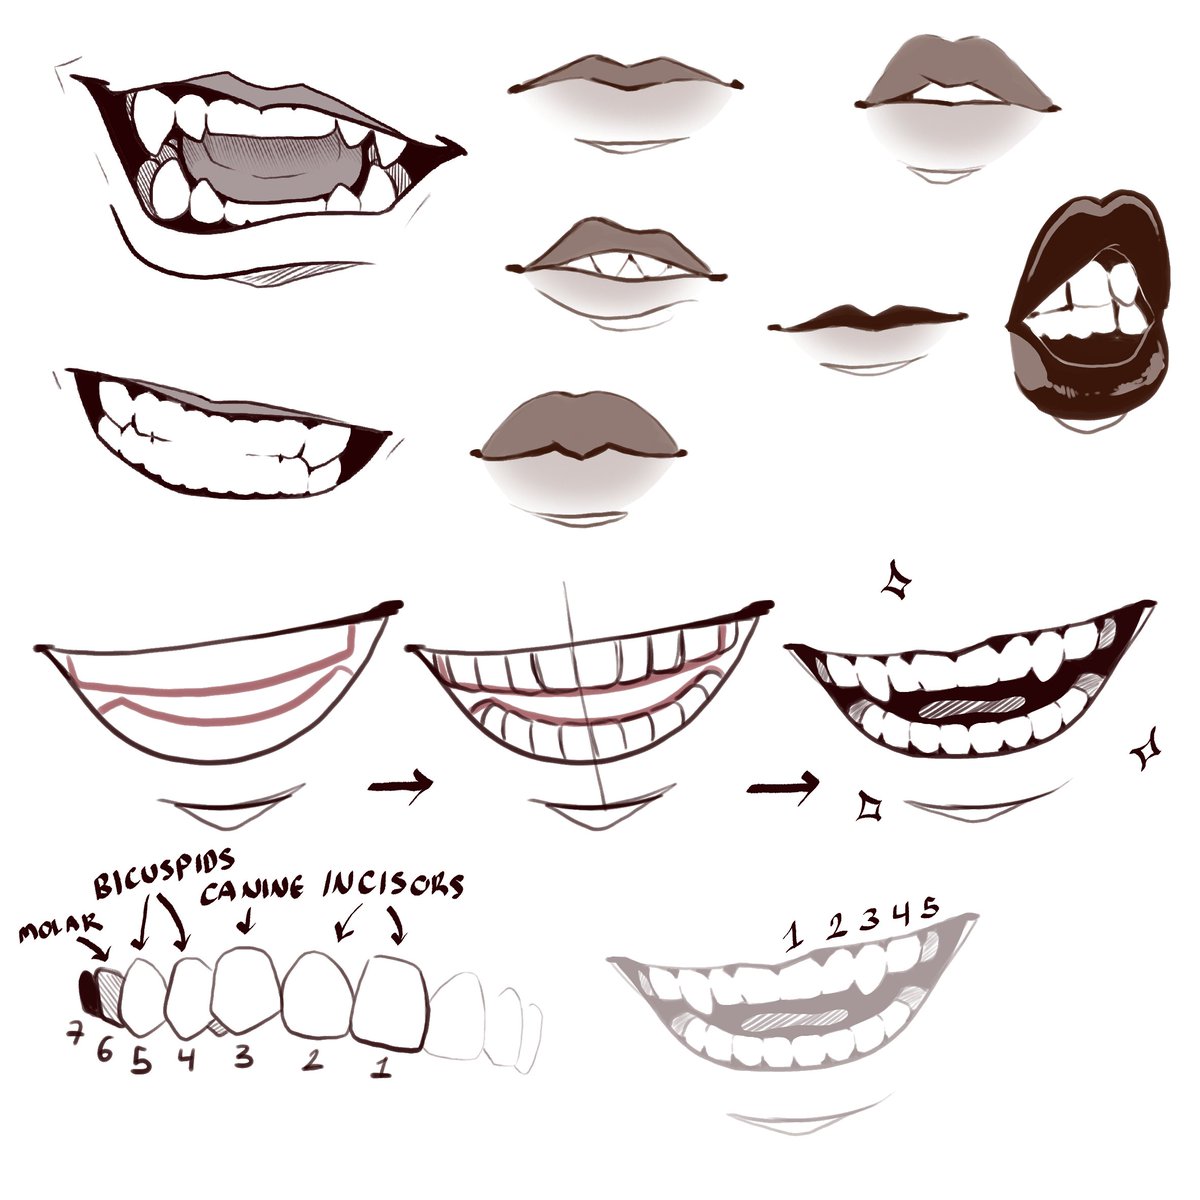 Another 'How I draw things' day! Today I show how I draw lips and color them! 👄💄 For extra, I added how I draw teeth! 🦷🪥 When I learned these basics then it was easier for me to make vampires, orcs, and other fantasy teeth! A simple anatomy lesson can help!